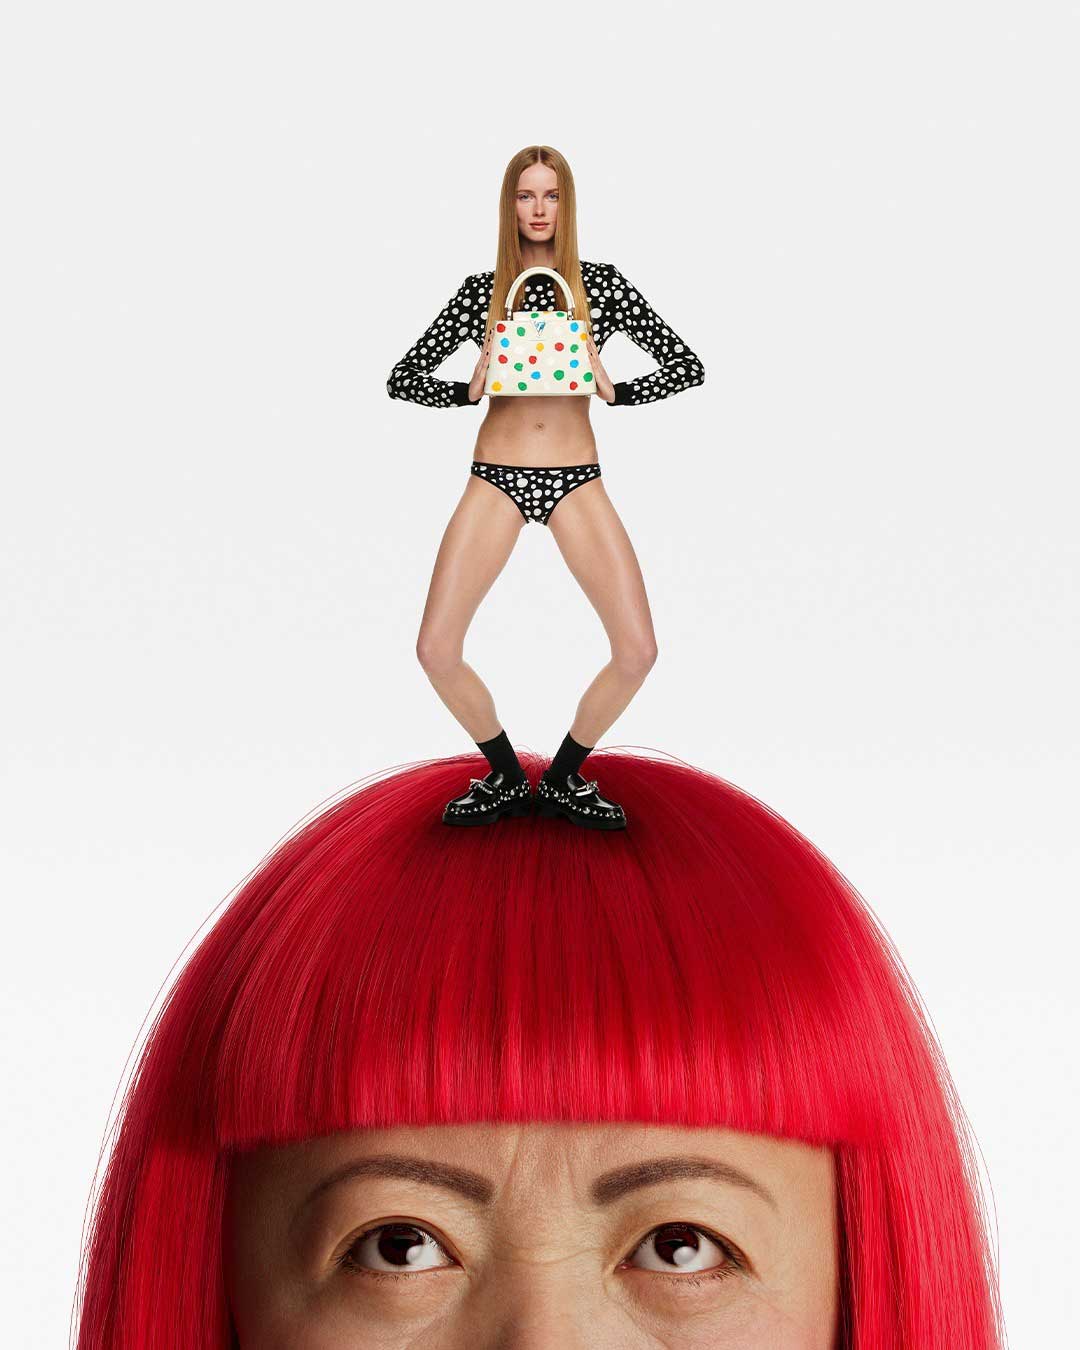 More on artist Yayoi Kusama's latest collaboration with @Louis